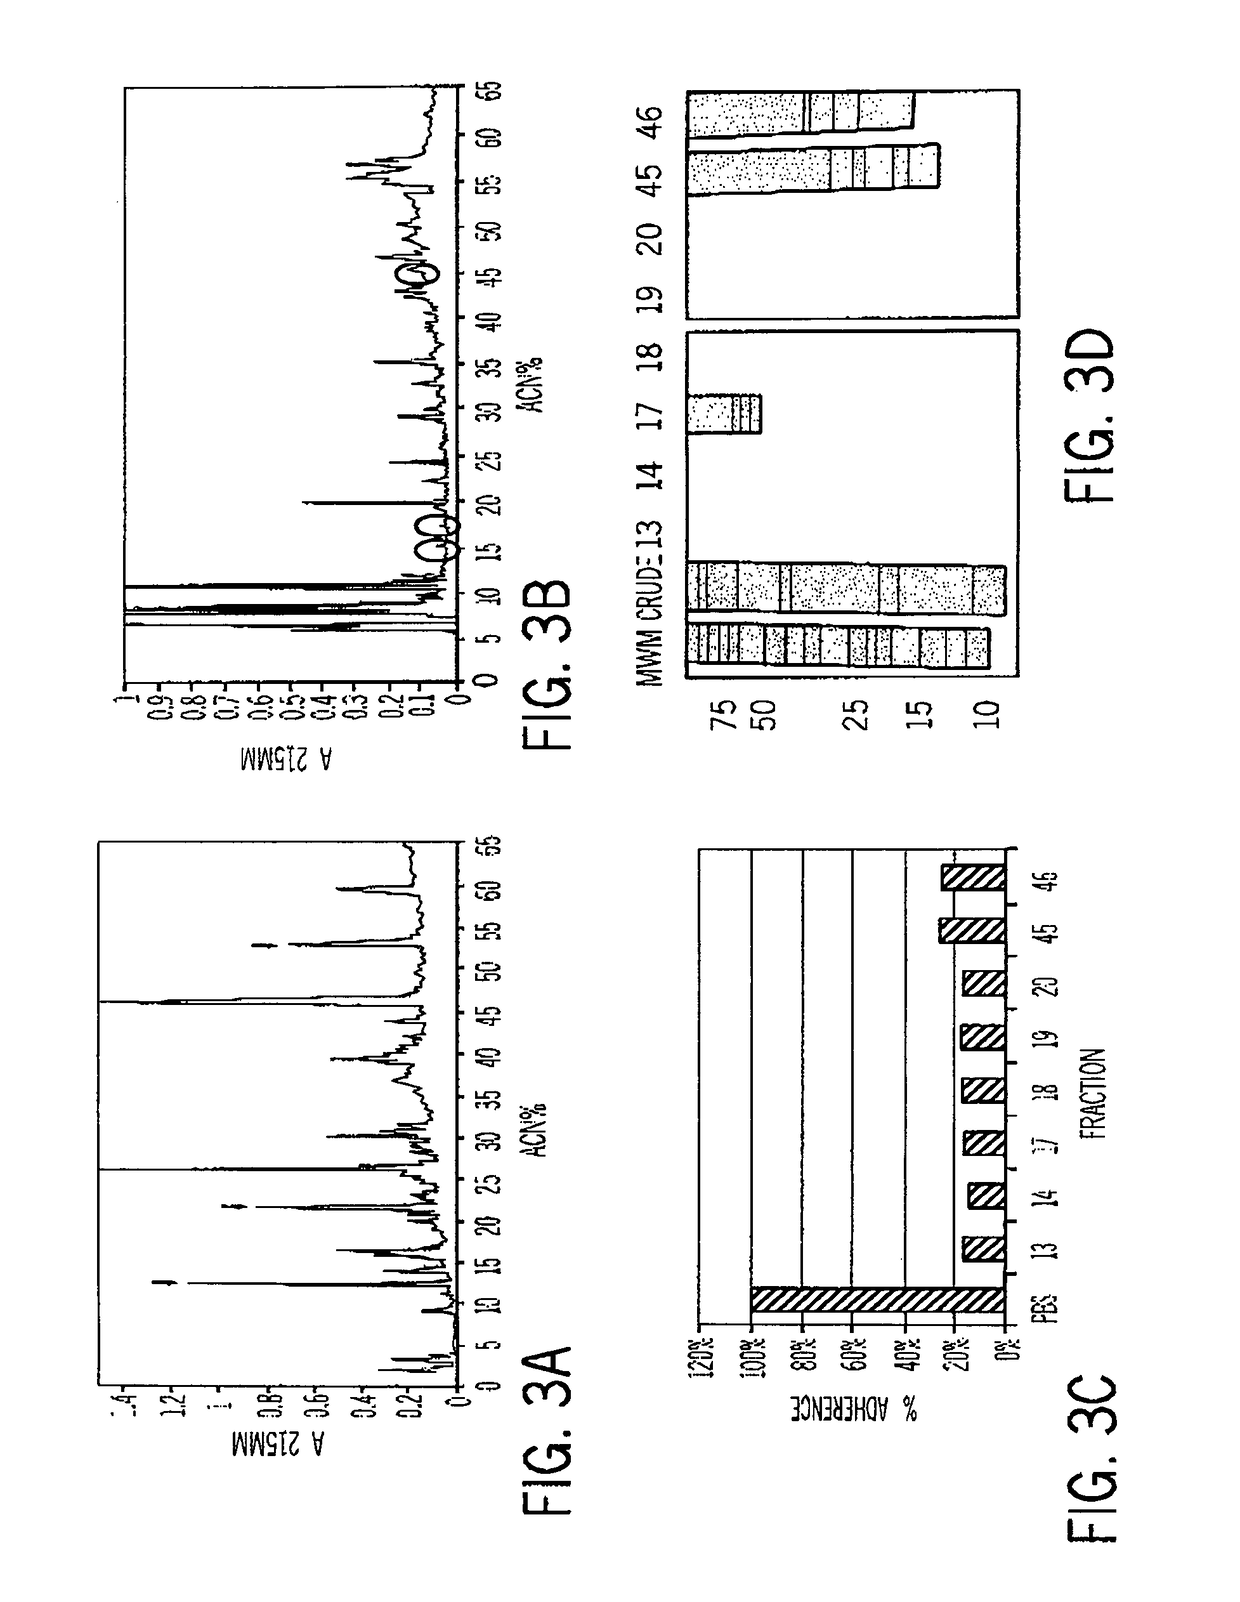 Compositions of aquatic origin for prevention of cell adhesion and methods of using same